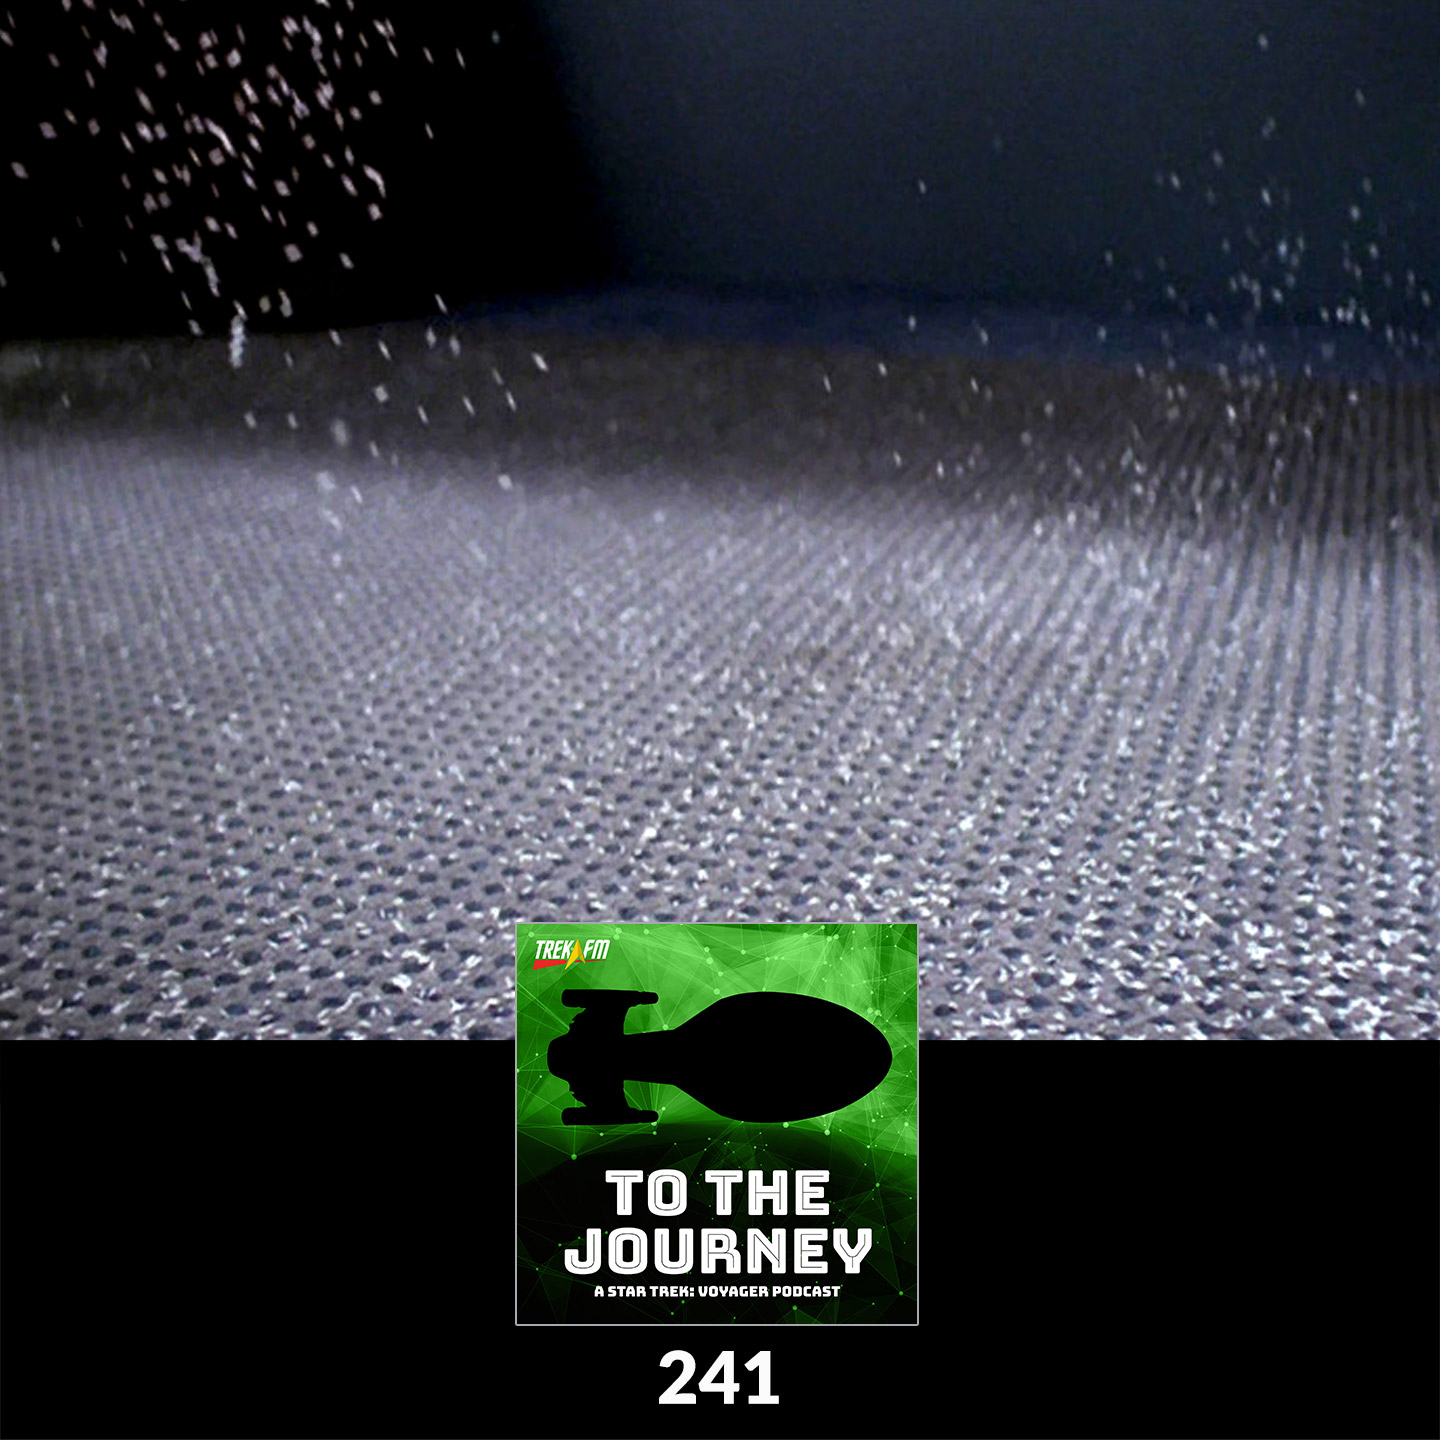 To The Journey 241: Leola Root Seeds, Anyone? - Course: Oblivion.